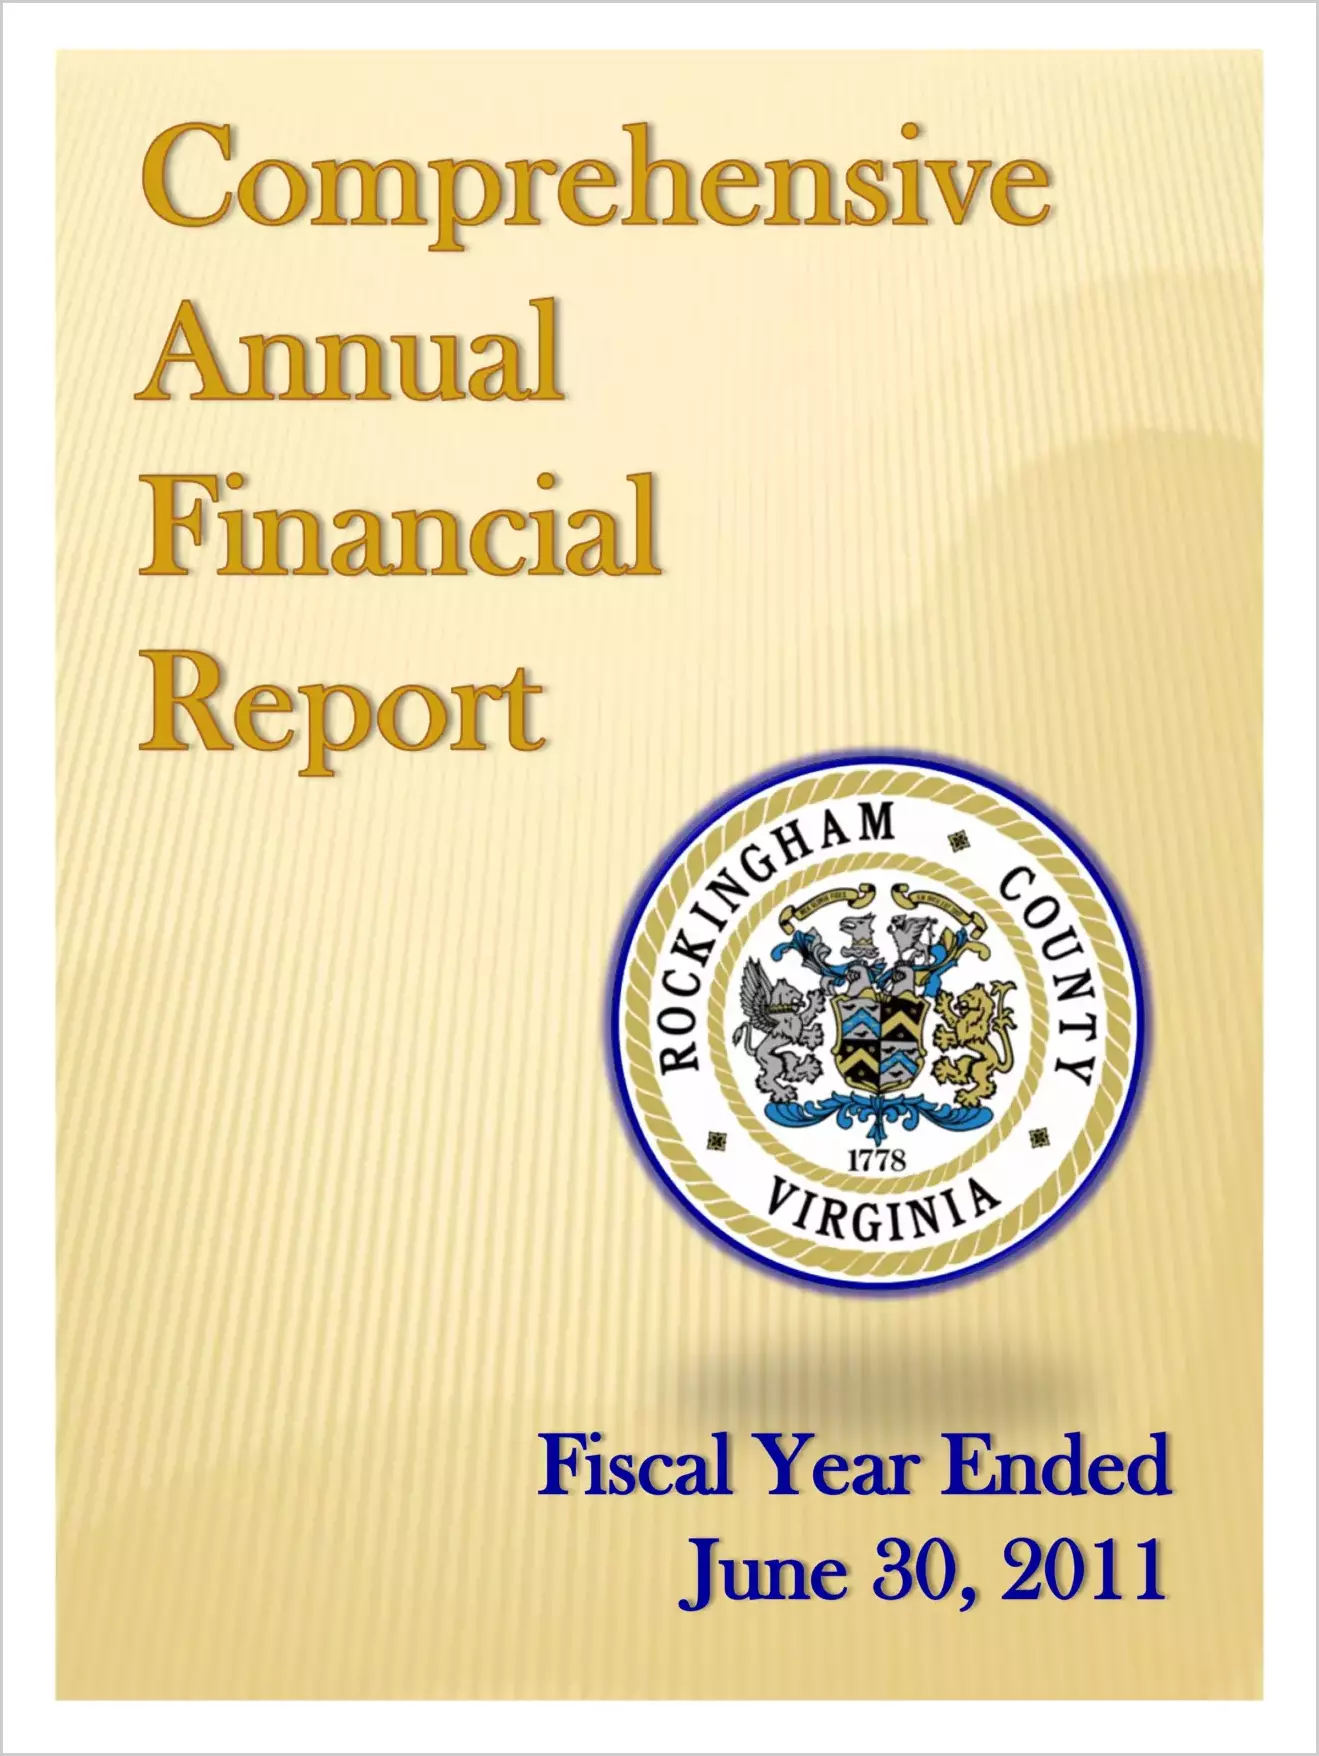 2011 Annual Financial Report for County of Rockingham